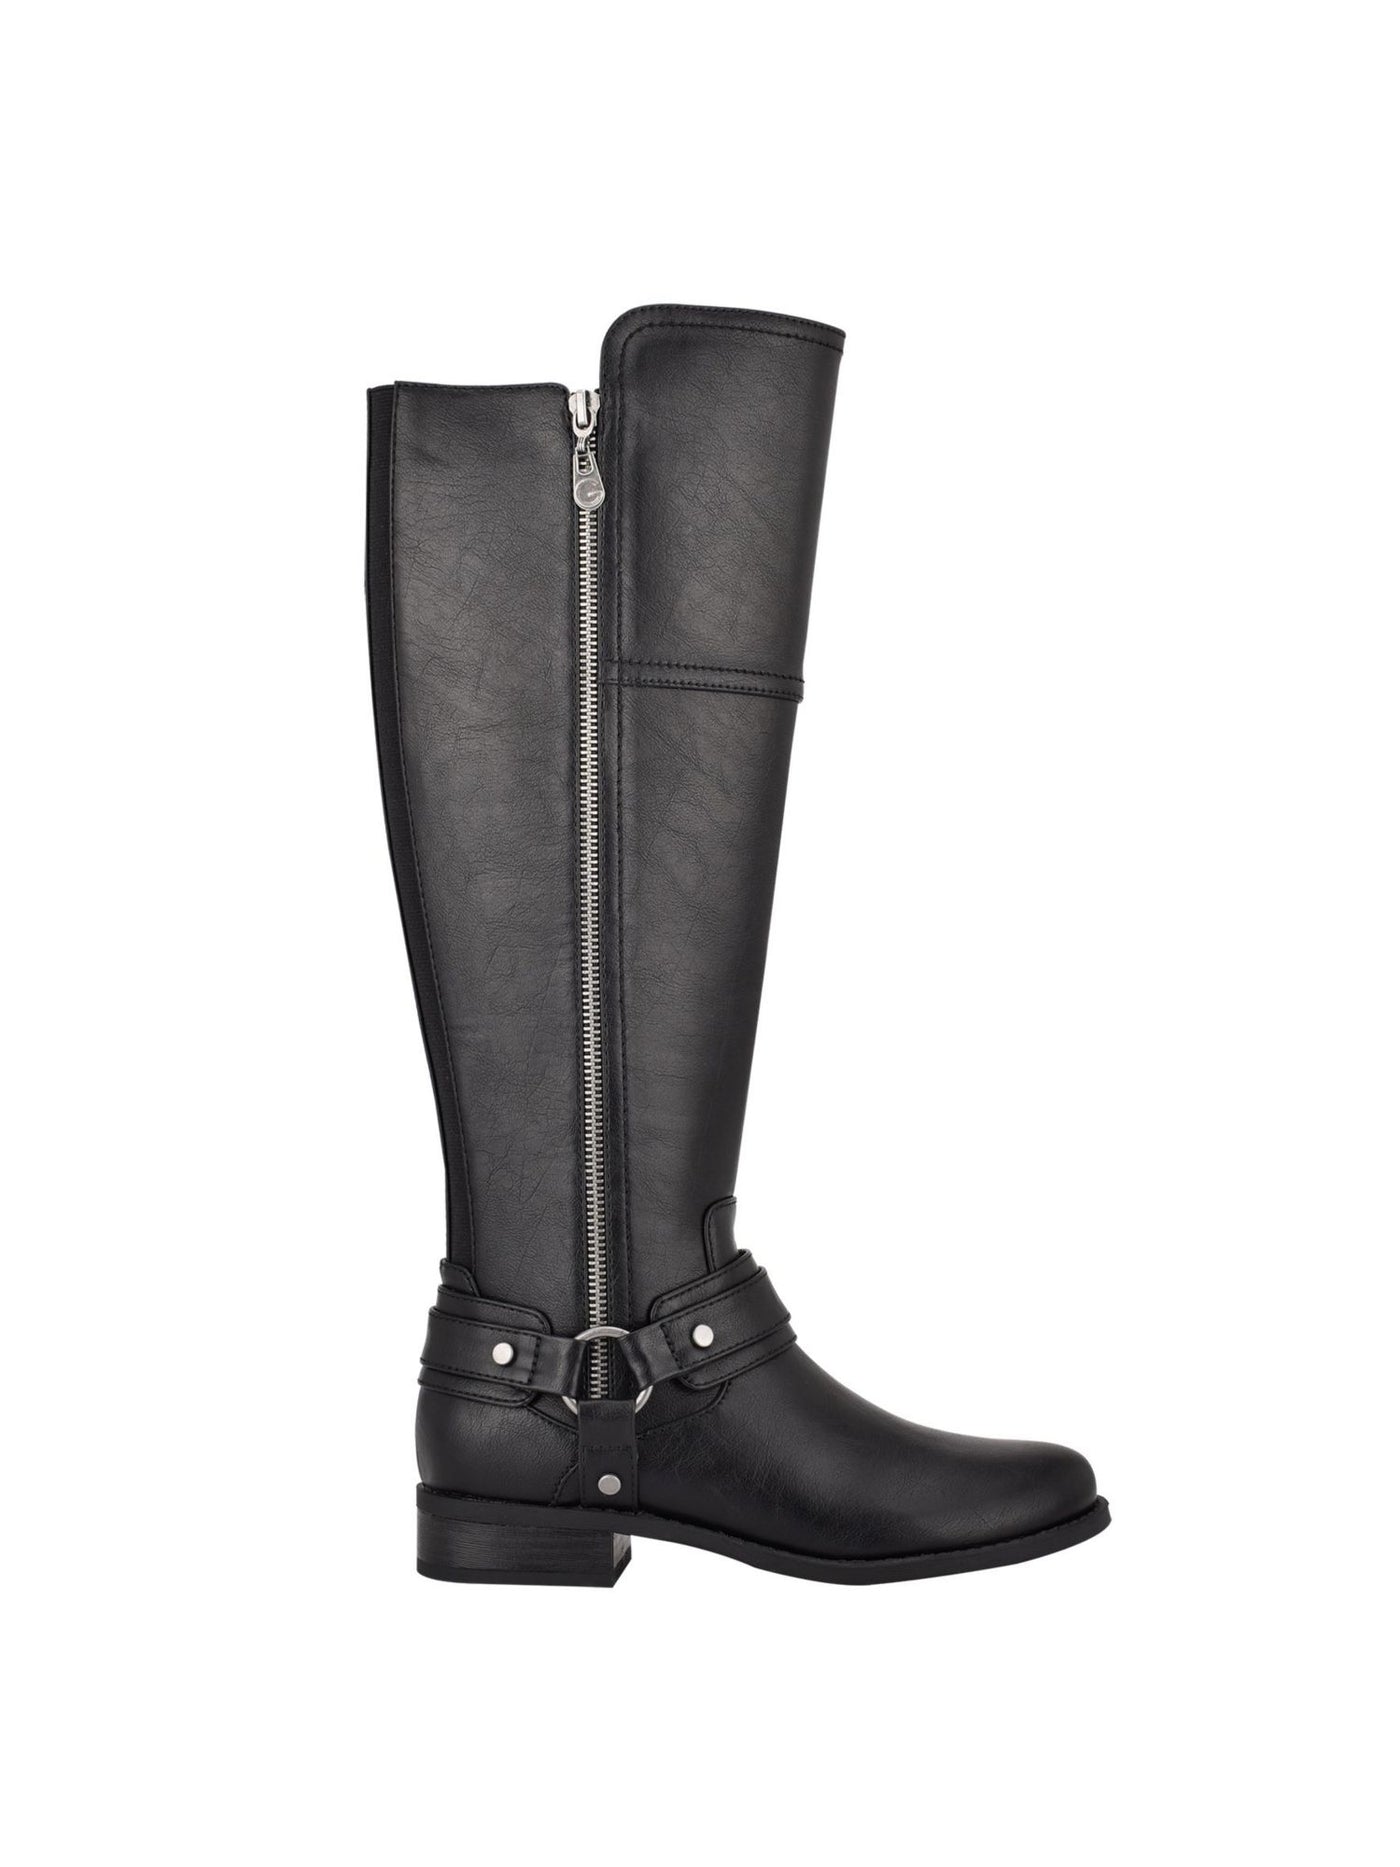 GBG LOS ANGELES Womens Black Flex Gore Back Accents Gold-Tone Hardware Accent Zipper Accent Buckle Accent Harlea Round Toe Block Heel Zip-Up Riding Boot 6 M WC